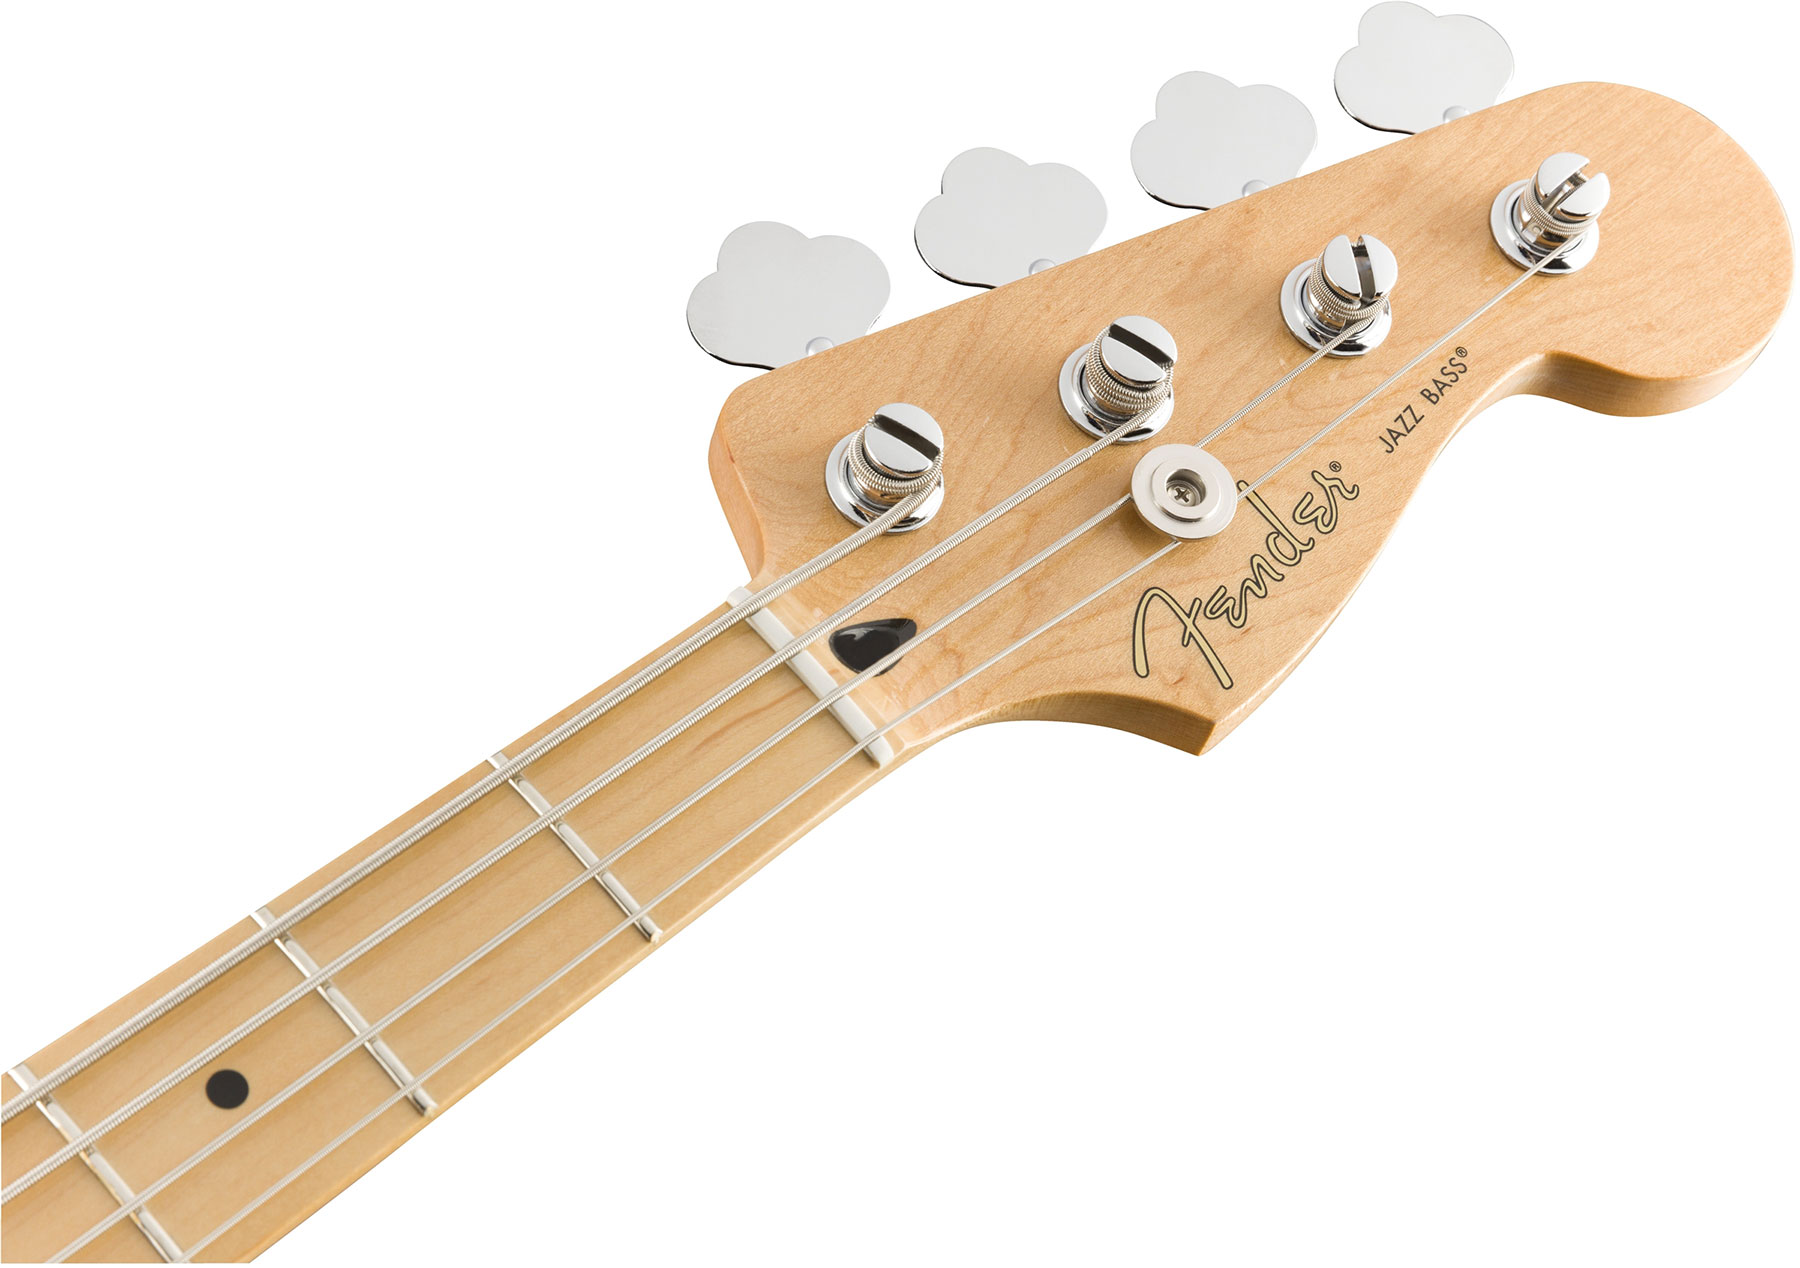 Fender Jazz Bass Player Mex Mn - Polar White - Solid body electric bass - Variation 3